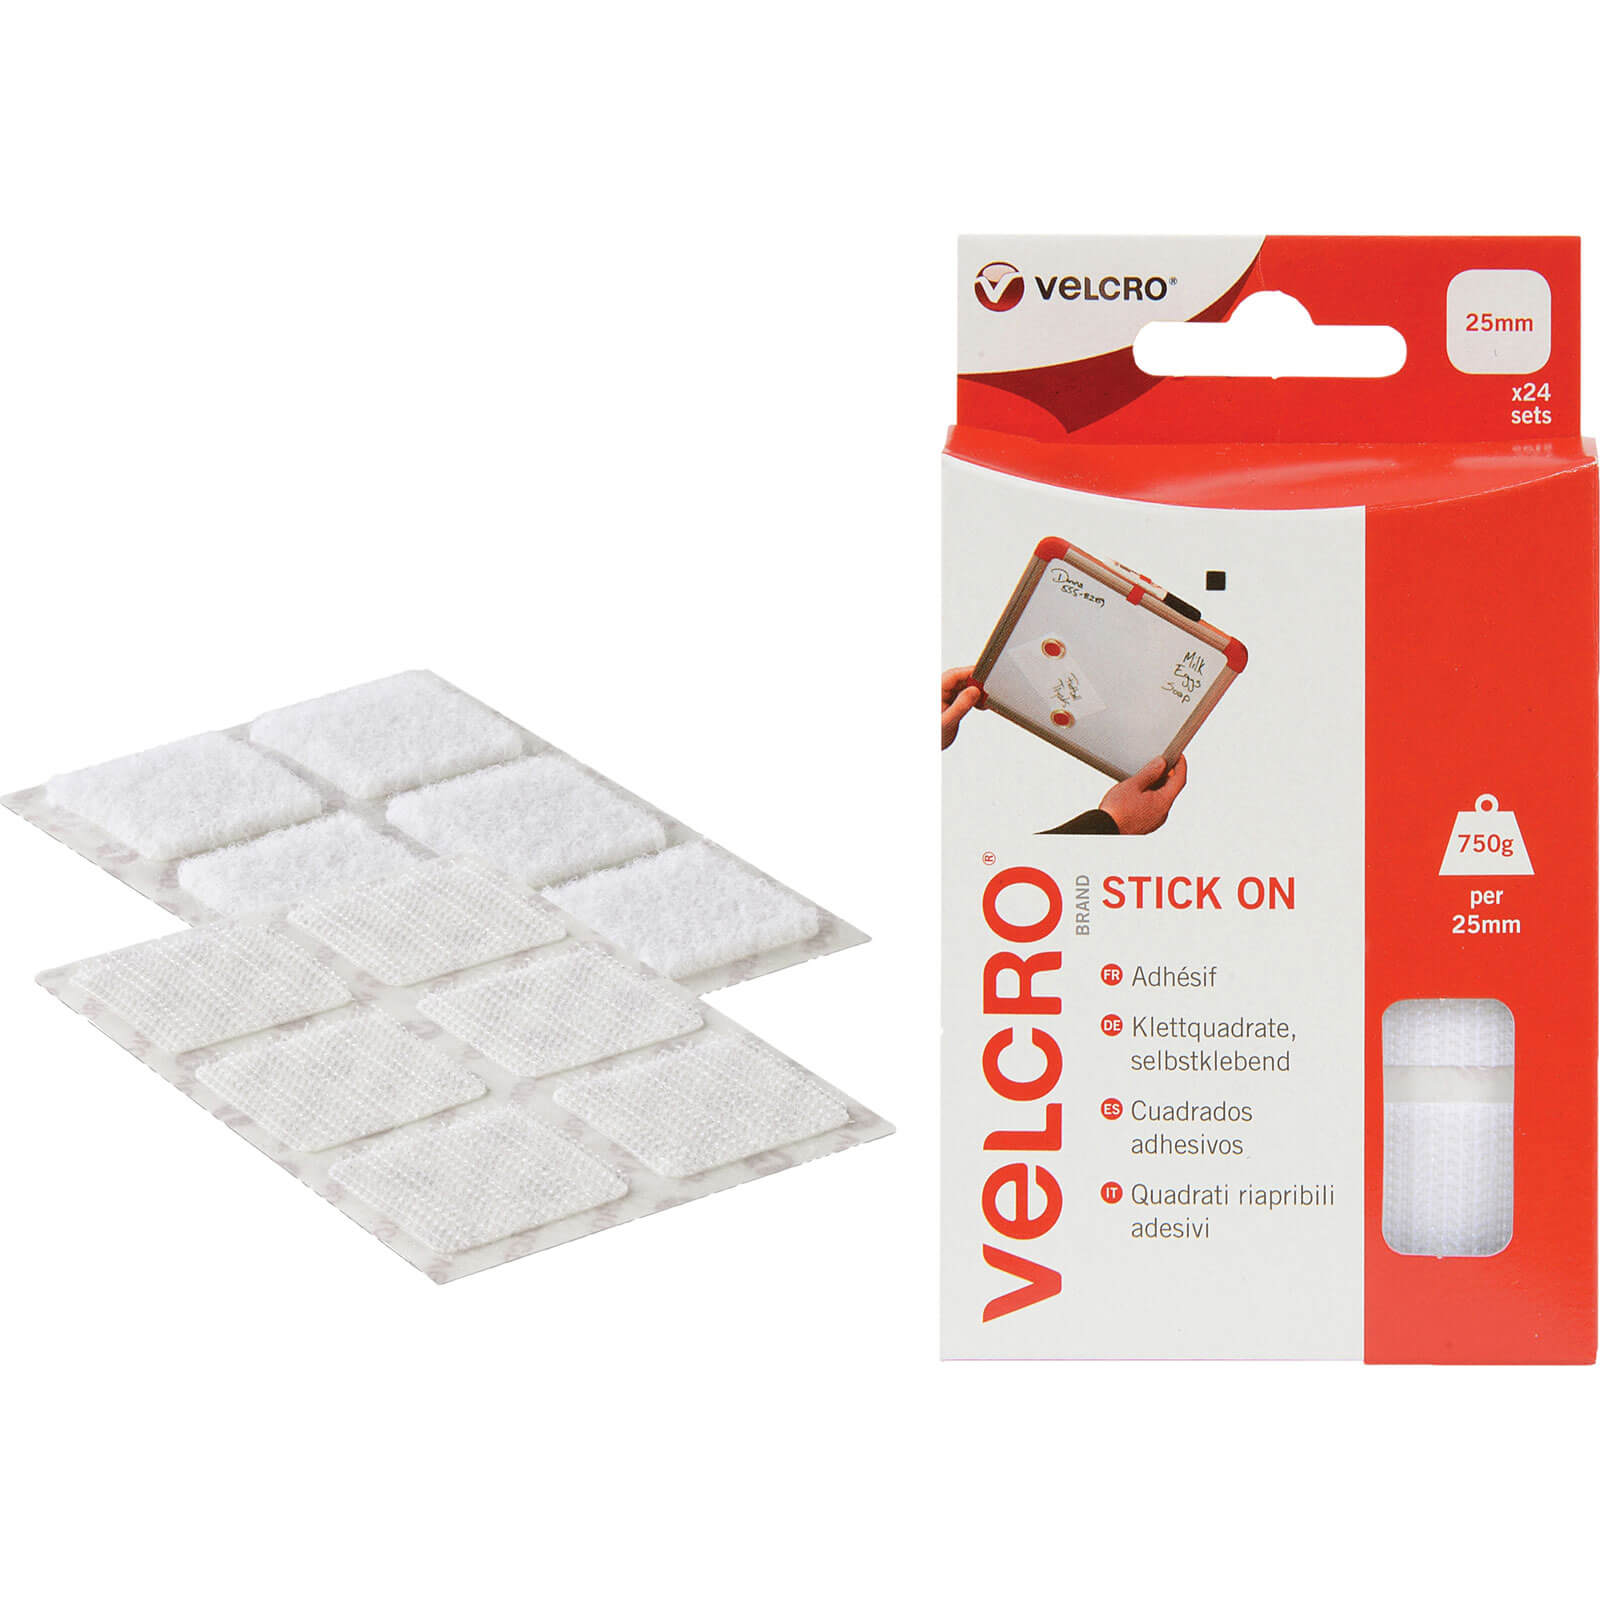 Image of Velcro Stick On Squares White 25mm 25mm Pack of 24